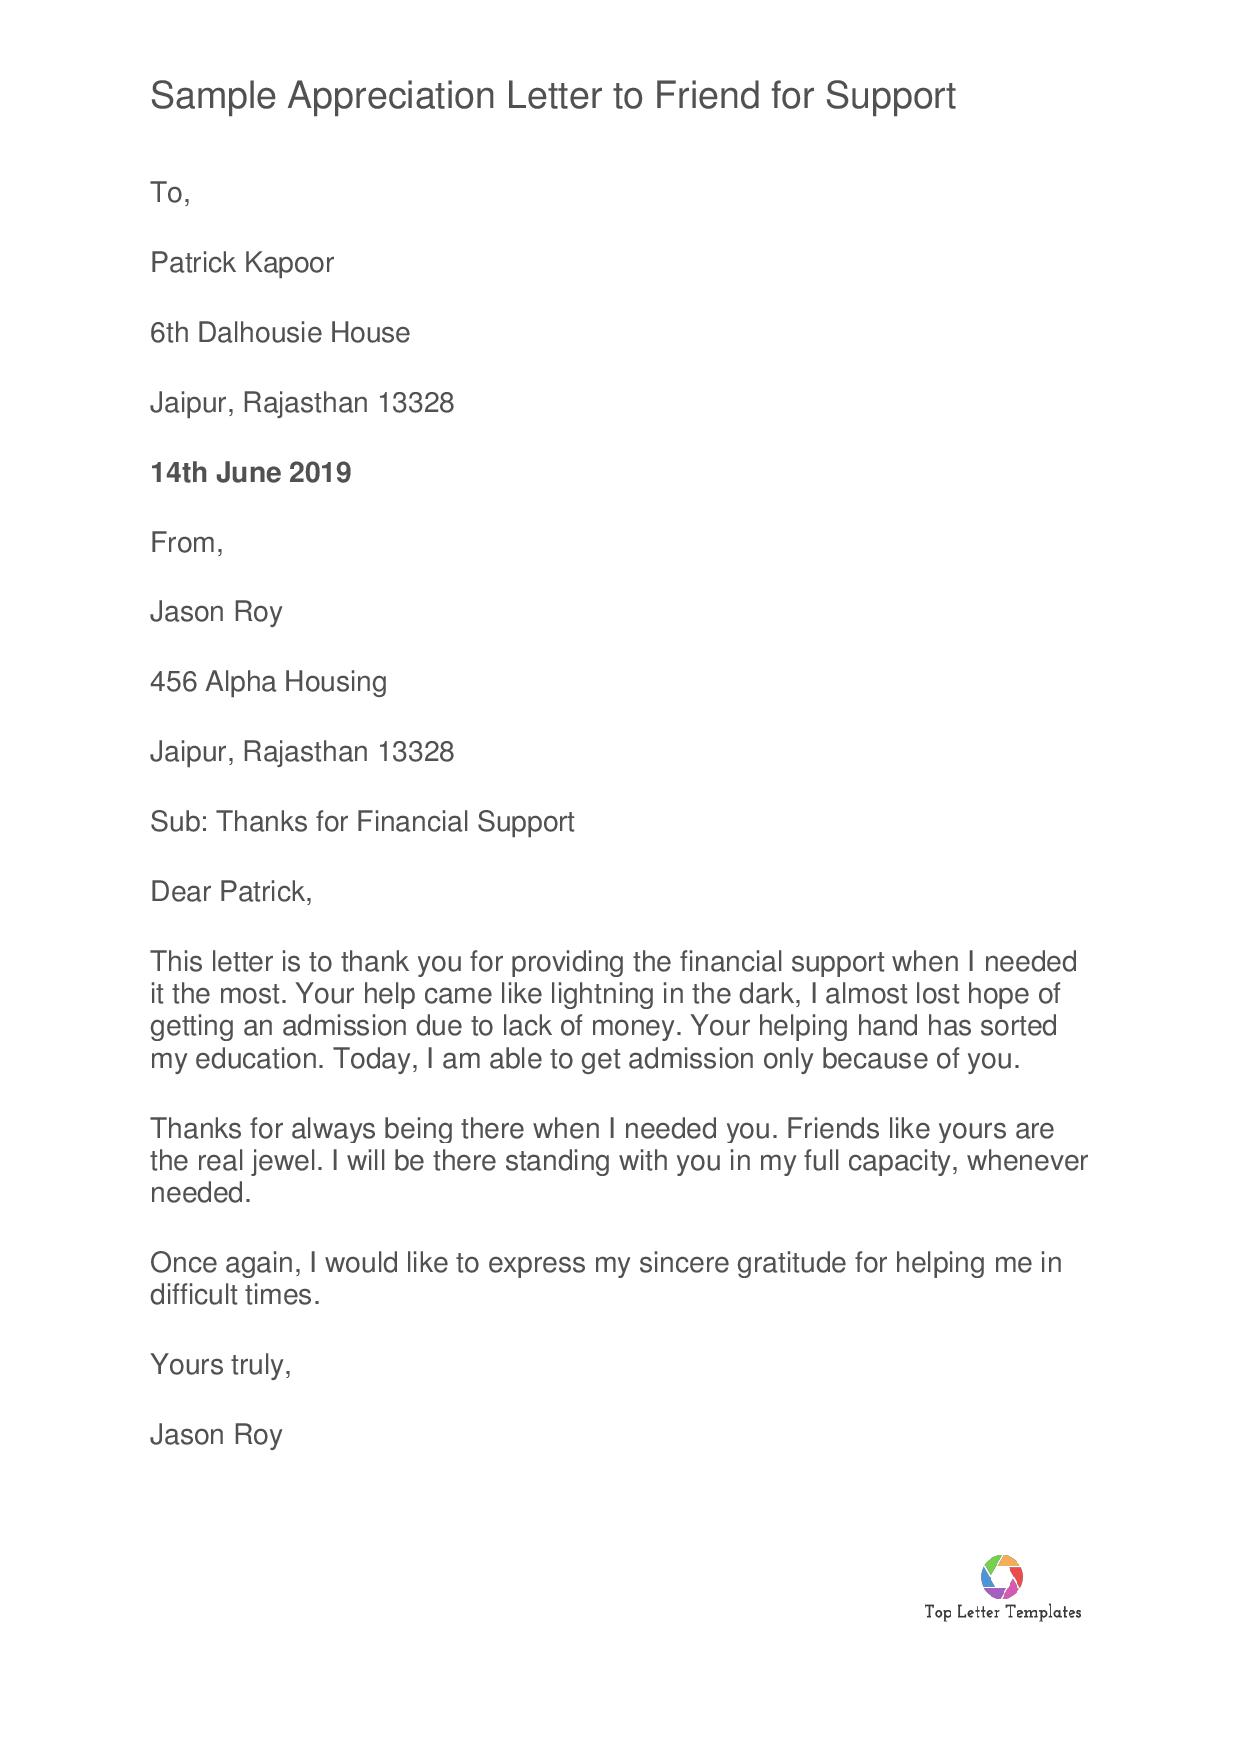 Sample Letter of Appreciation for Support - Pdf, Doc - Top Letter Templates